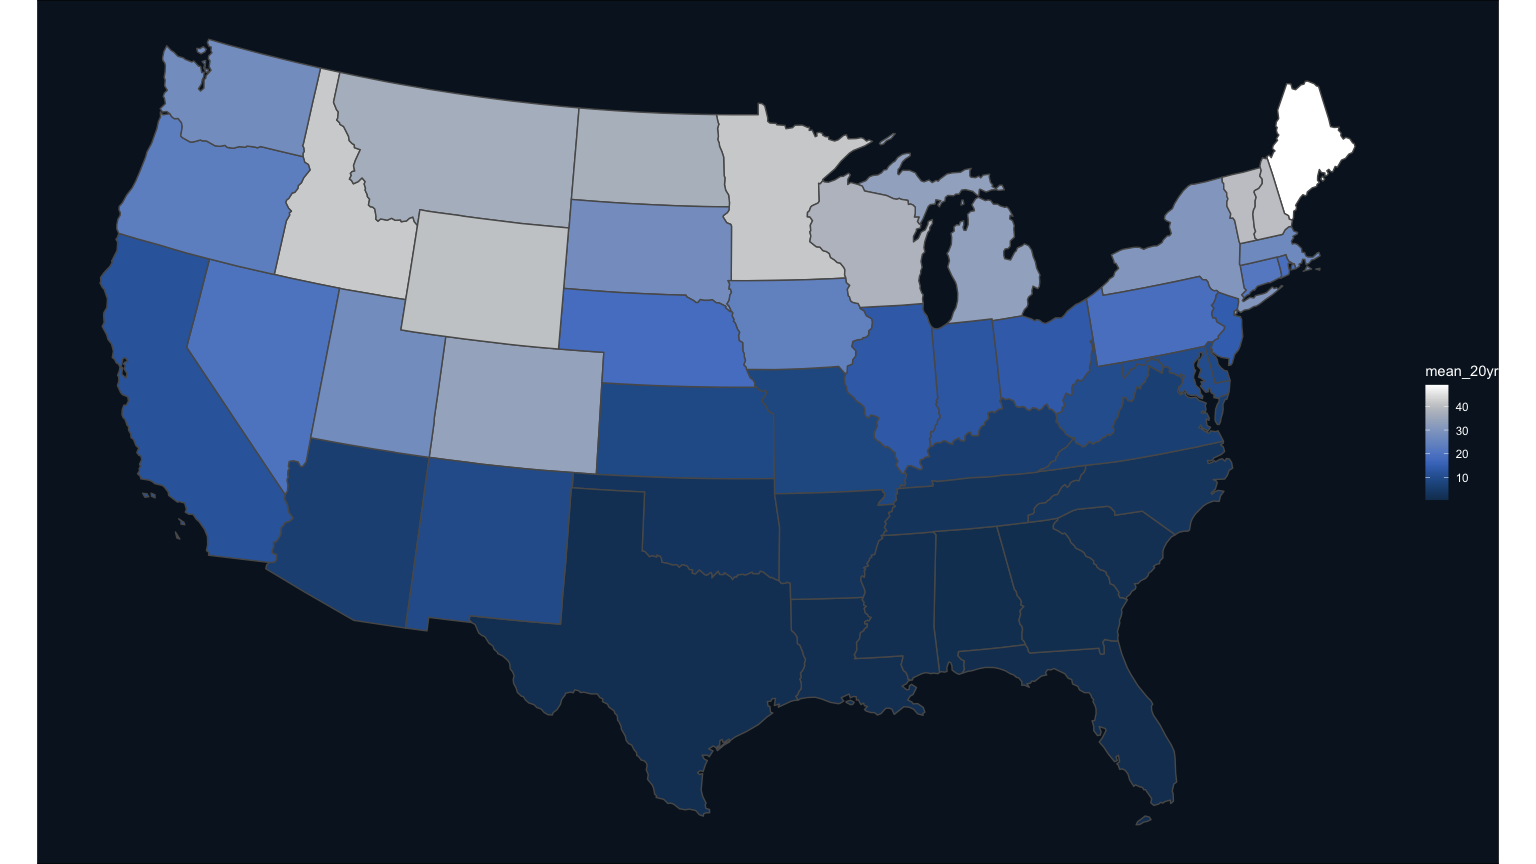 A choropleth map of the contiguous United States snowing snow cover index by state with a blue color scale. Light blue states, such as Maine, Minnesota, and Idaho have higher snow cover whereas dark blue states, such as Texas, Louisiana, and Florida have low to no snow cover values.